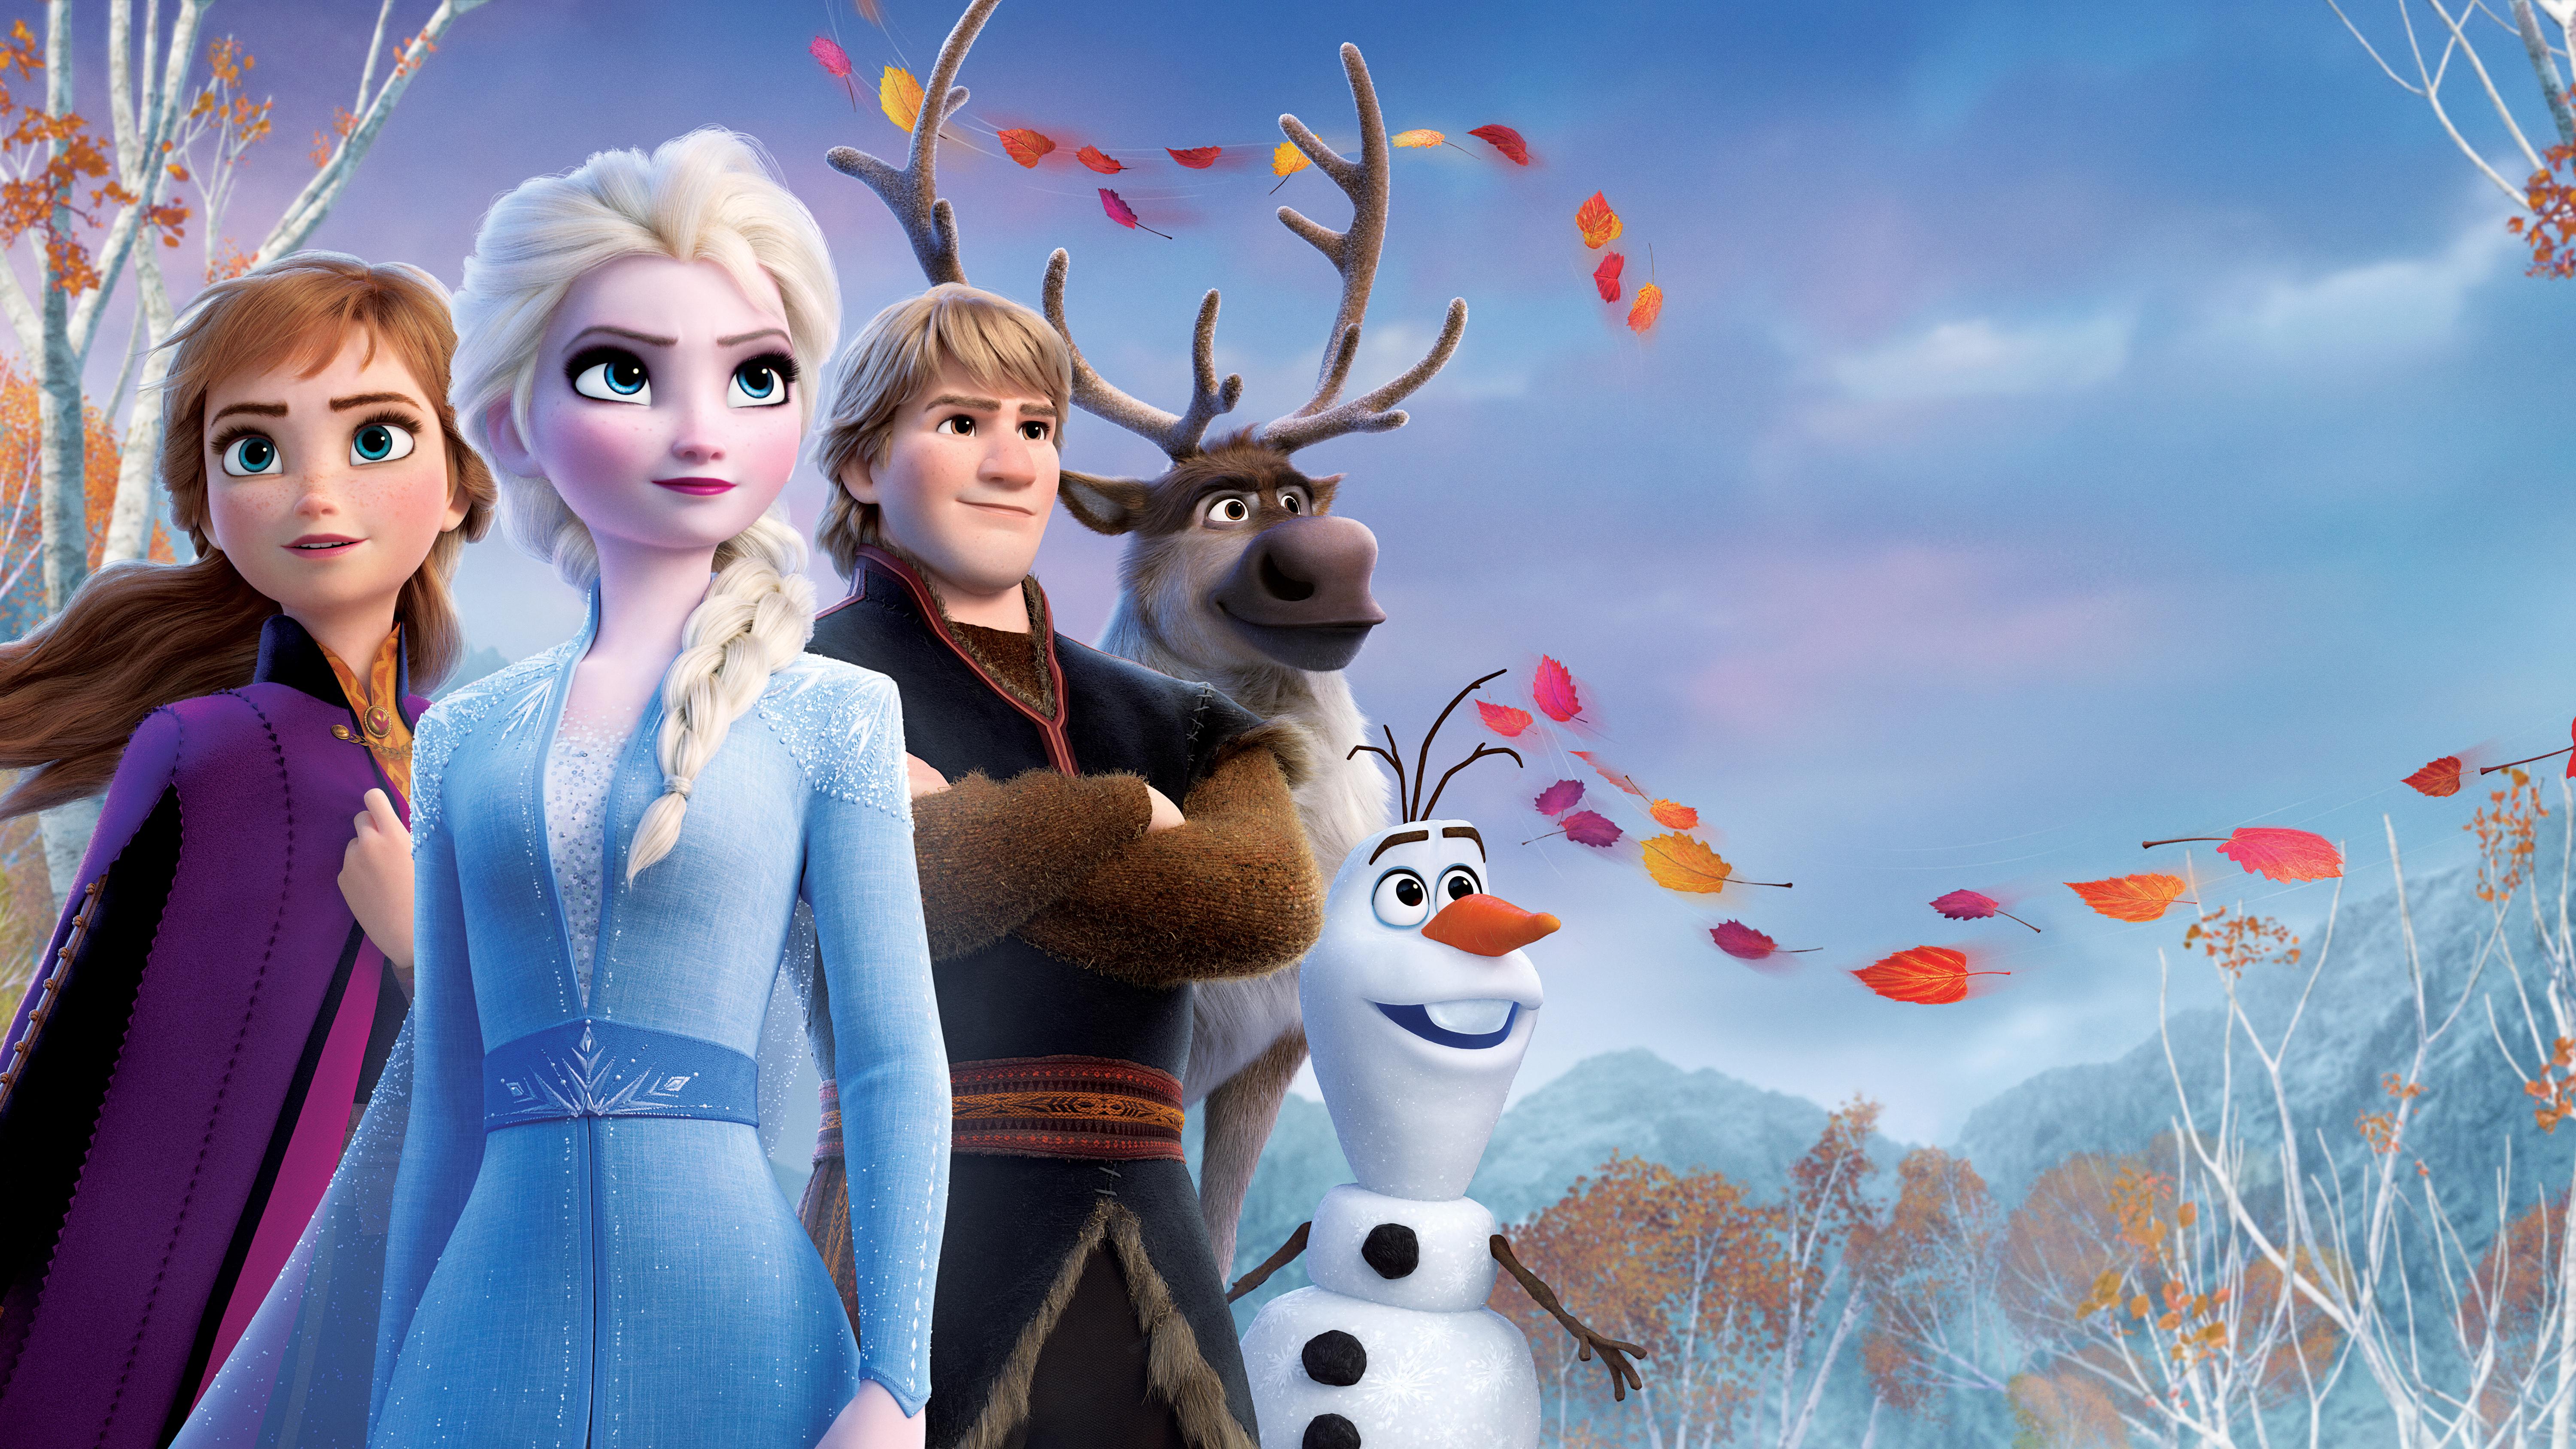 Frozen II for ios download free